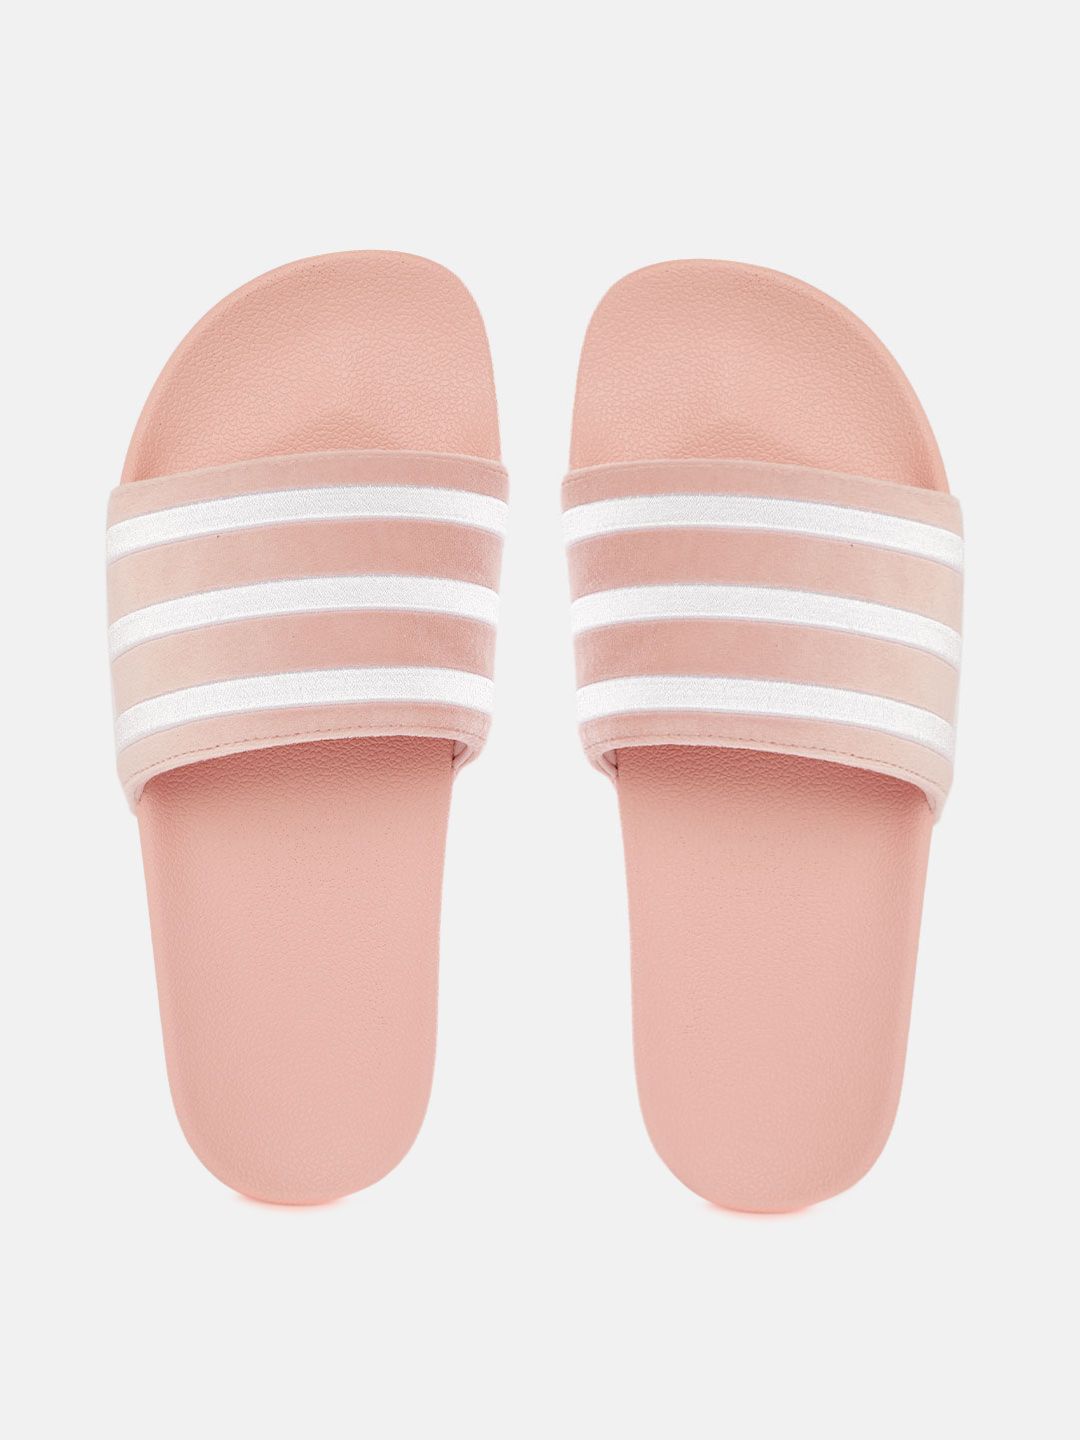 ADIDAS Originals Women Pink & Silver Striped Adilette Sustainable Sliders Price in India